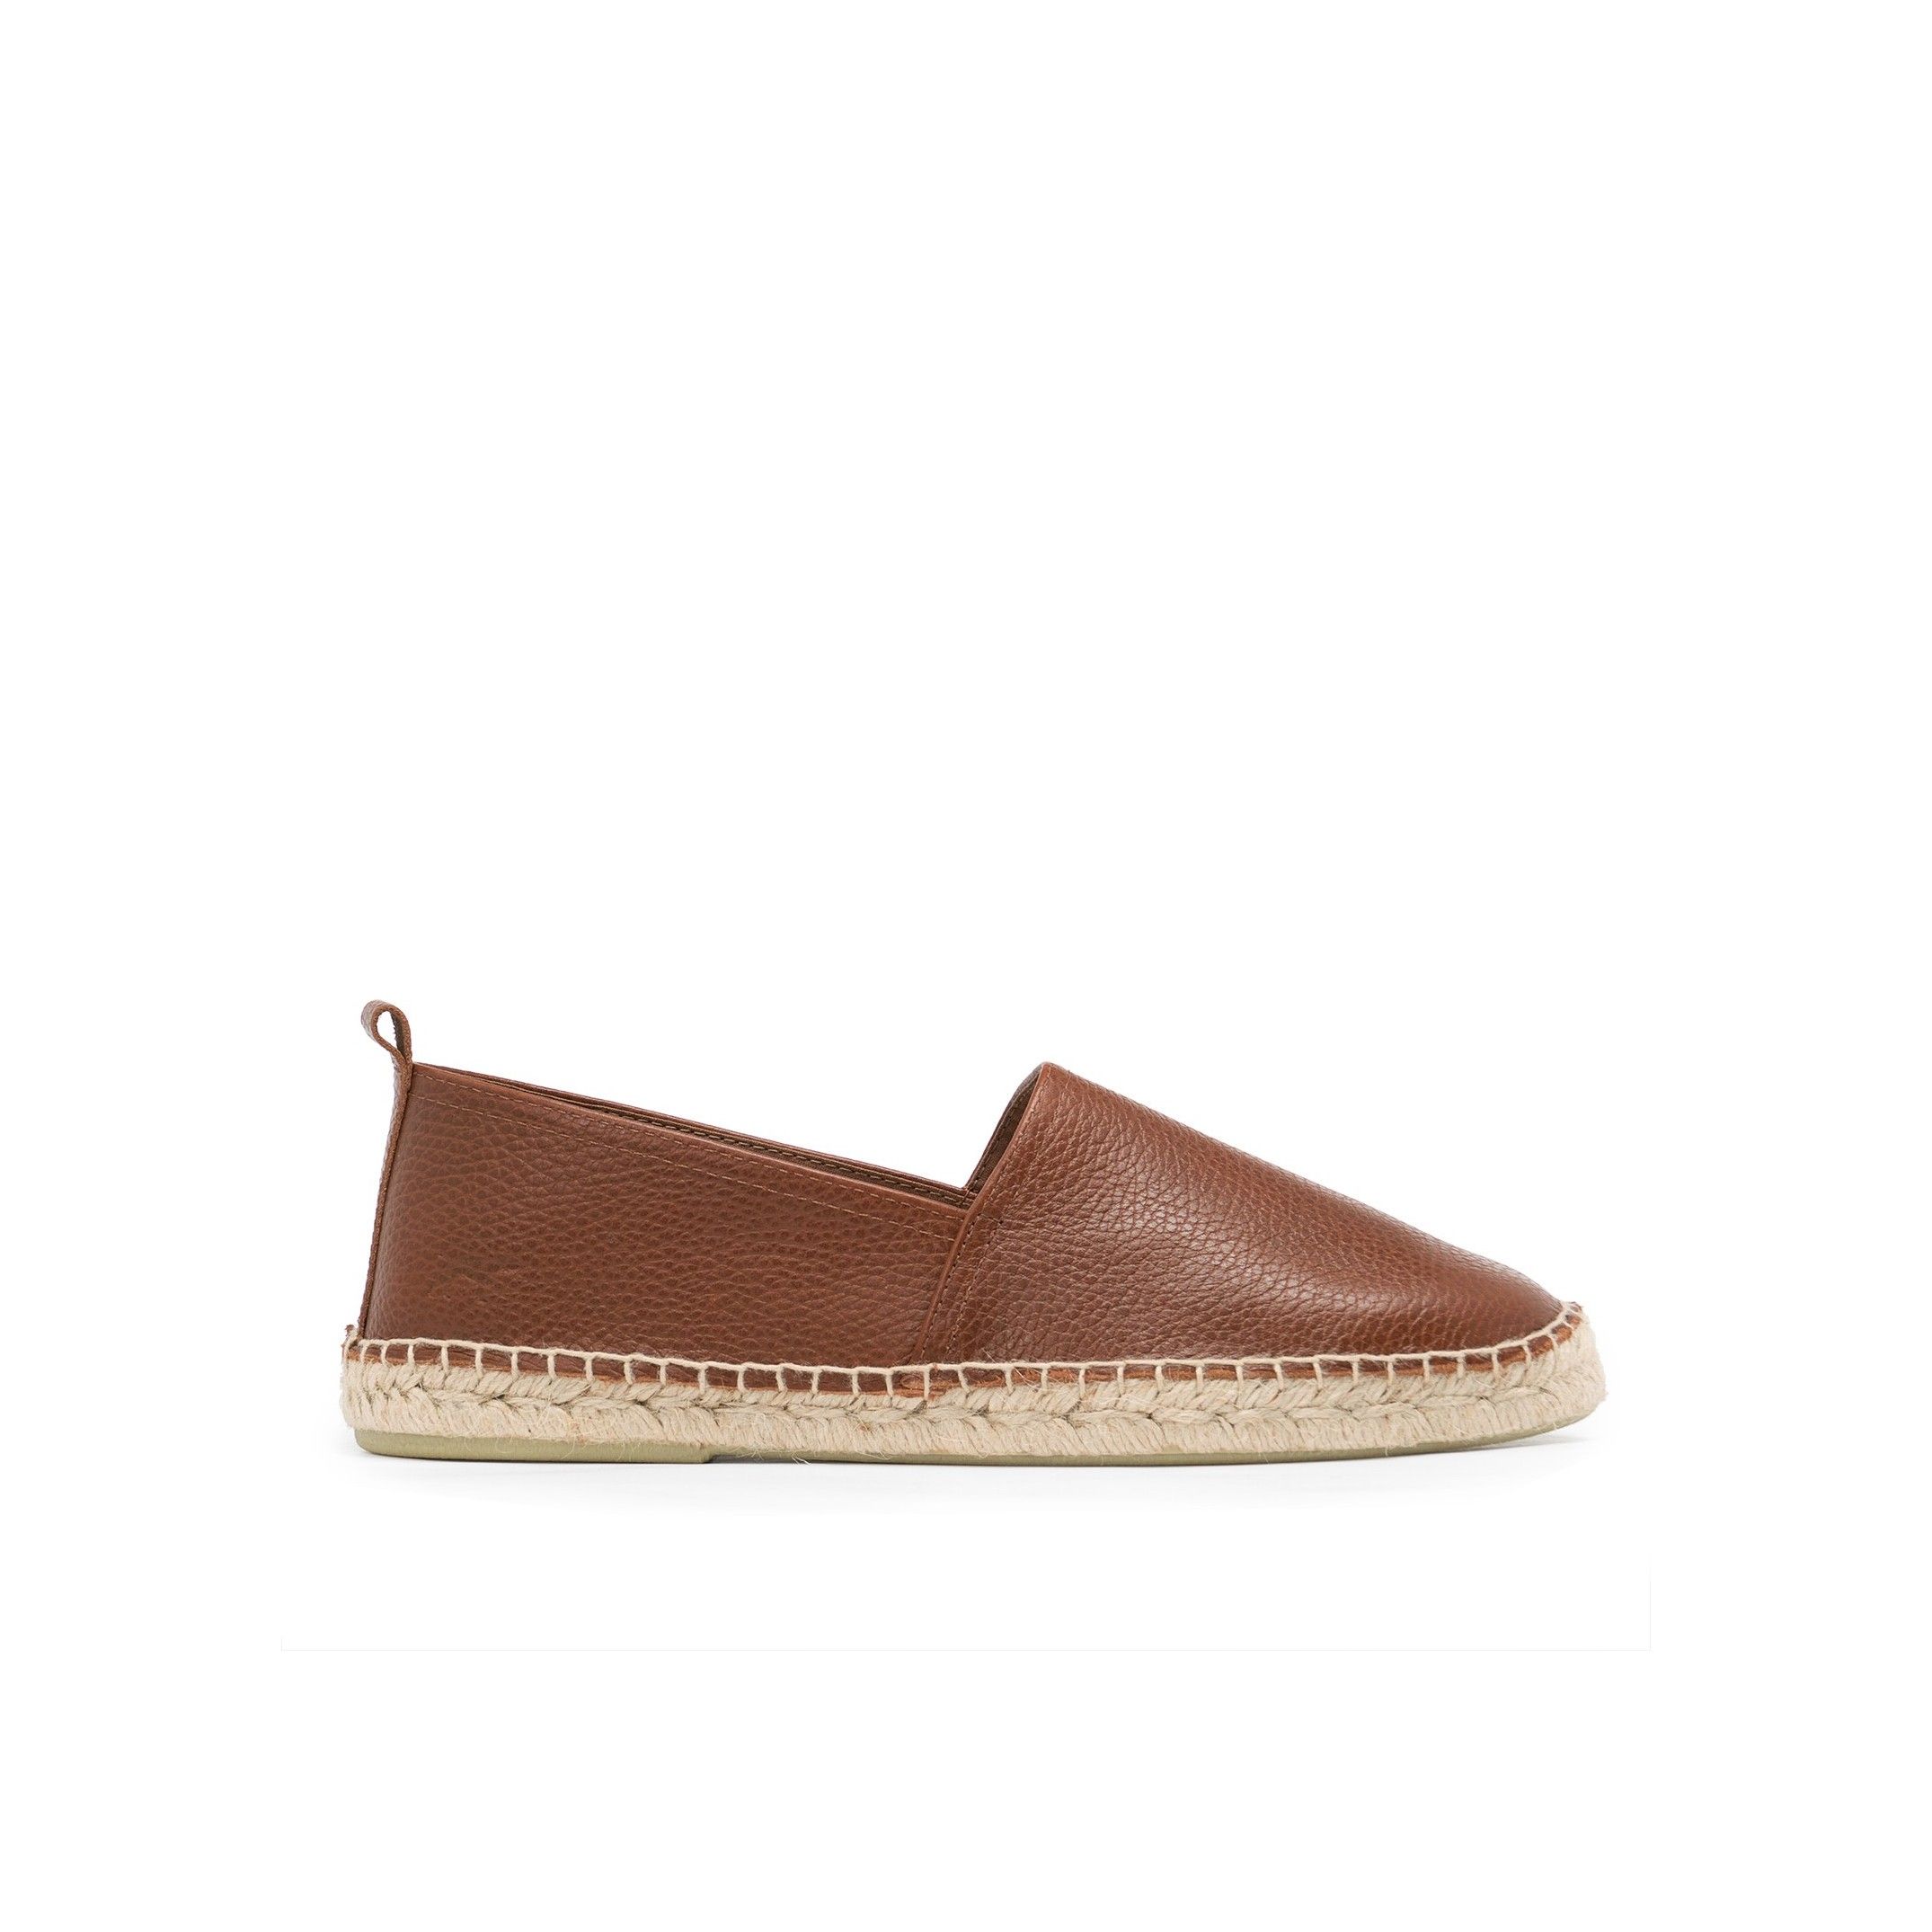 Flat espadrilles, by Son Castellanisimos. Upper made of cowhide leather. Inner made of cowhide leather. Closure: laces. Inner lining and insole: 25% cowhide leather and 75% of textile. Sole material: synthetic and non-slip. Heel height: 2 cm. Designed and made of leather.